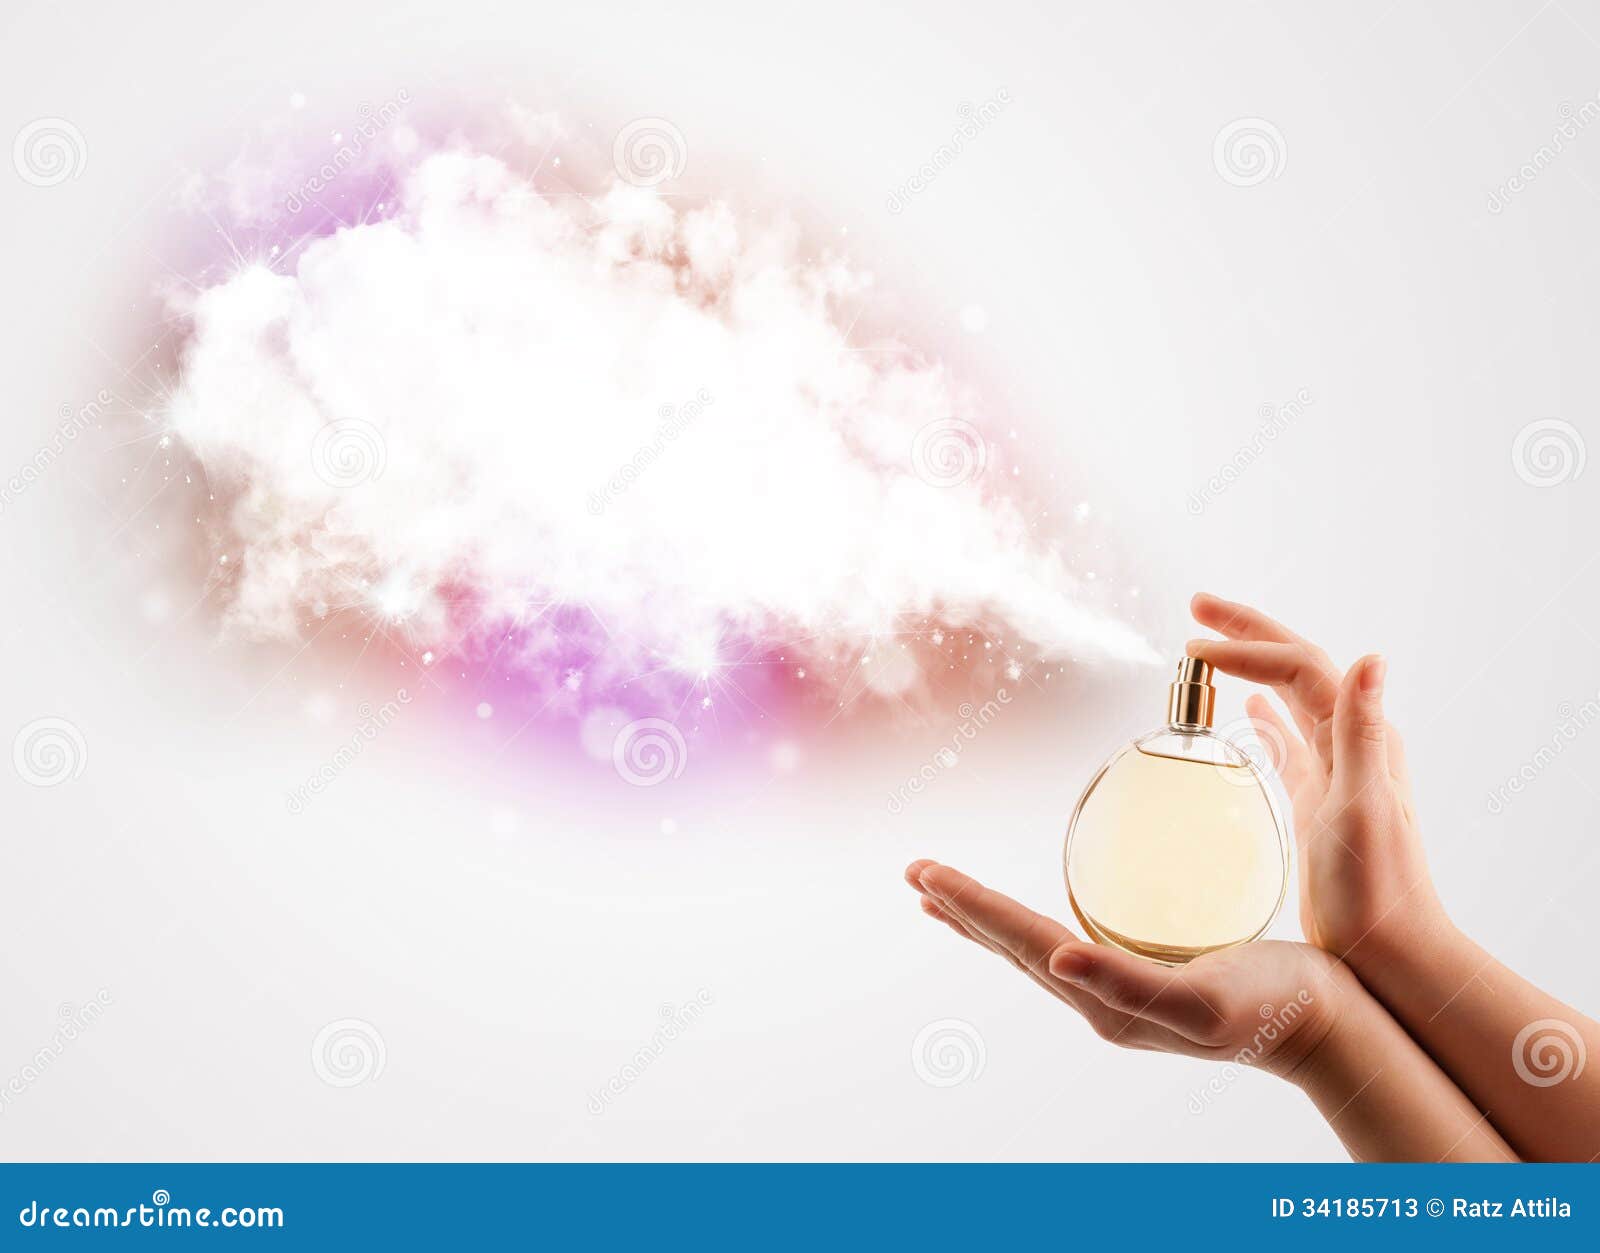 Woman Hands Spraying Colorful Cloud Stock Image - Image: 34185713